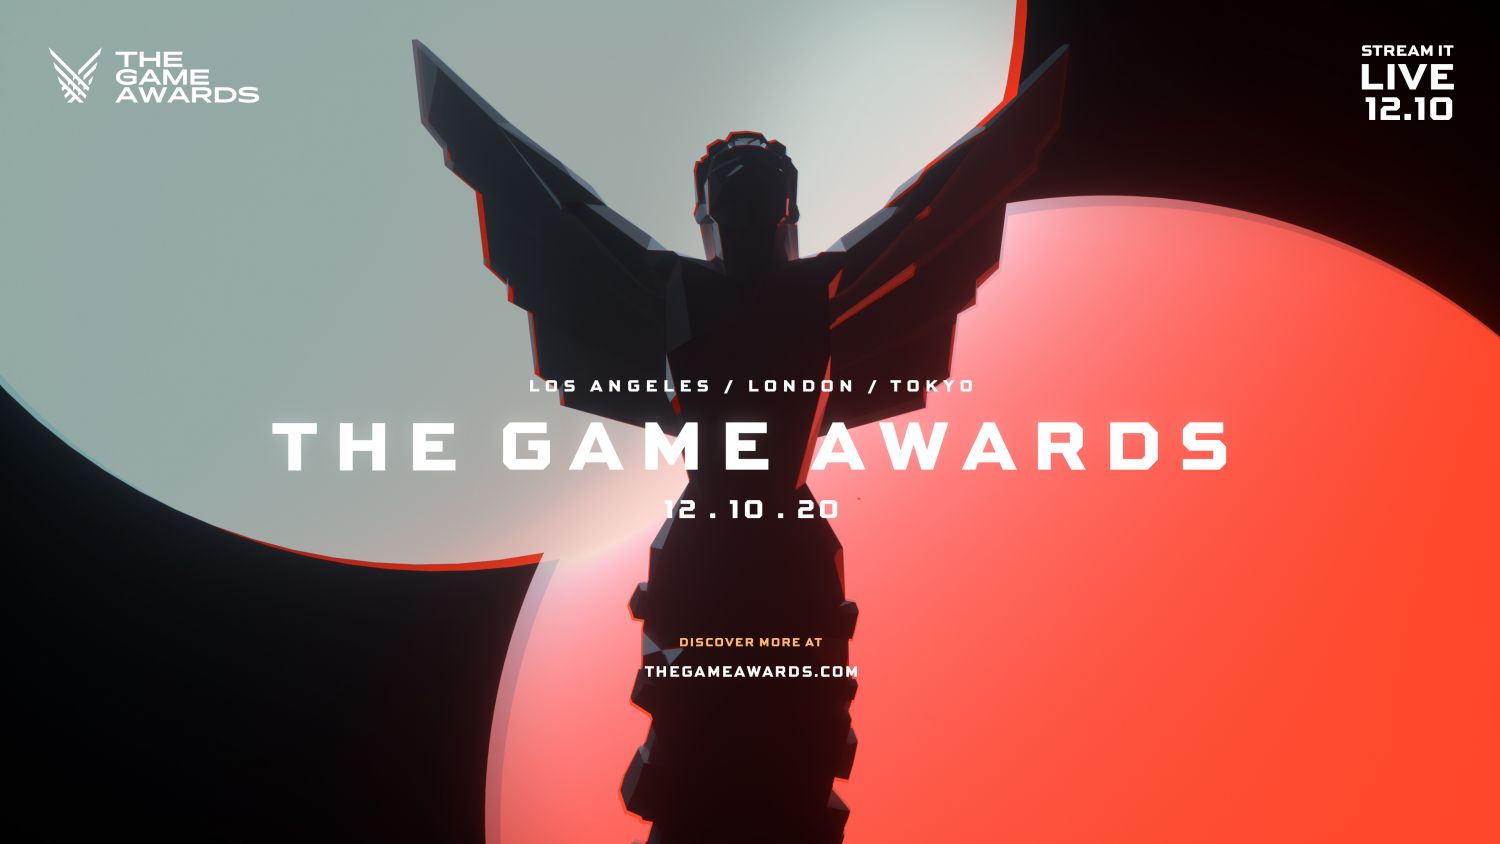 The Game Awards on X: These five #TheGameAwards nominees are